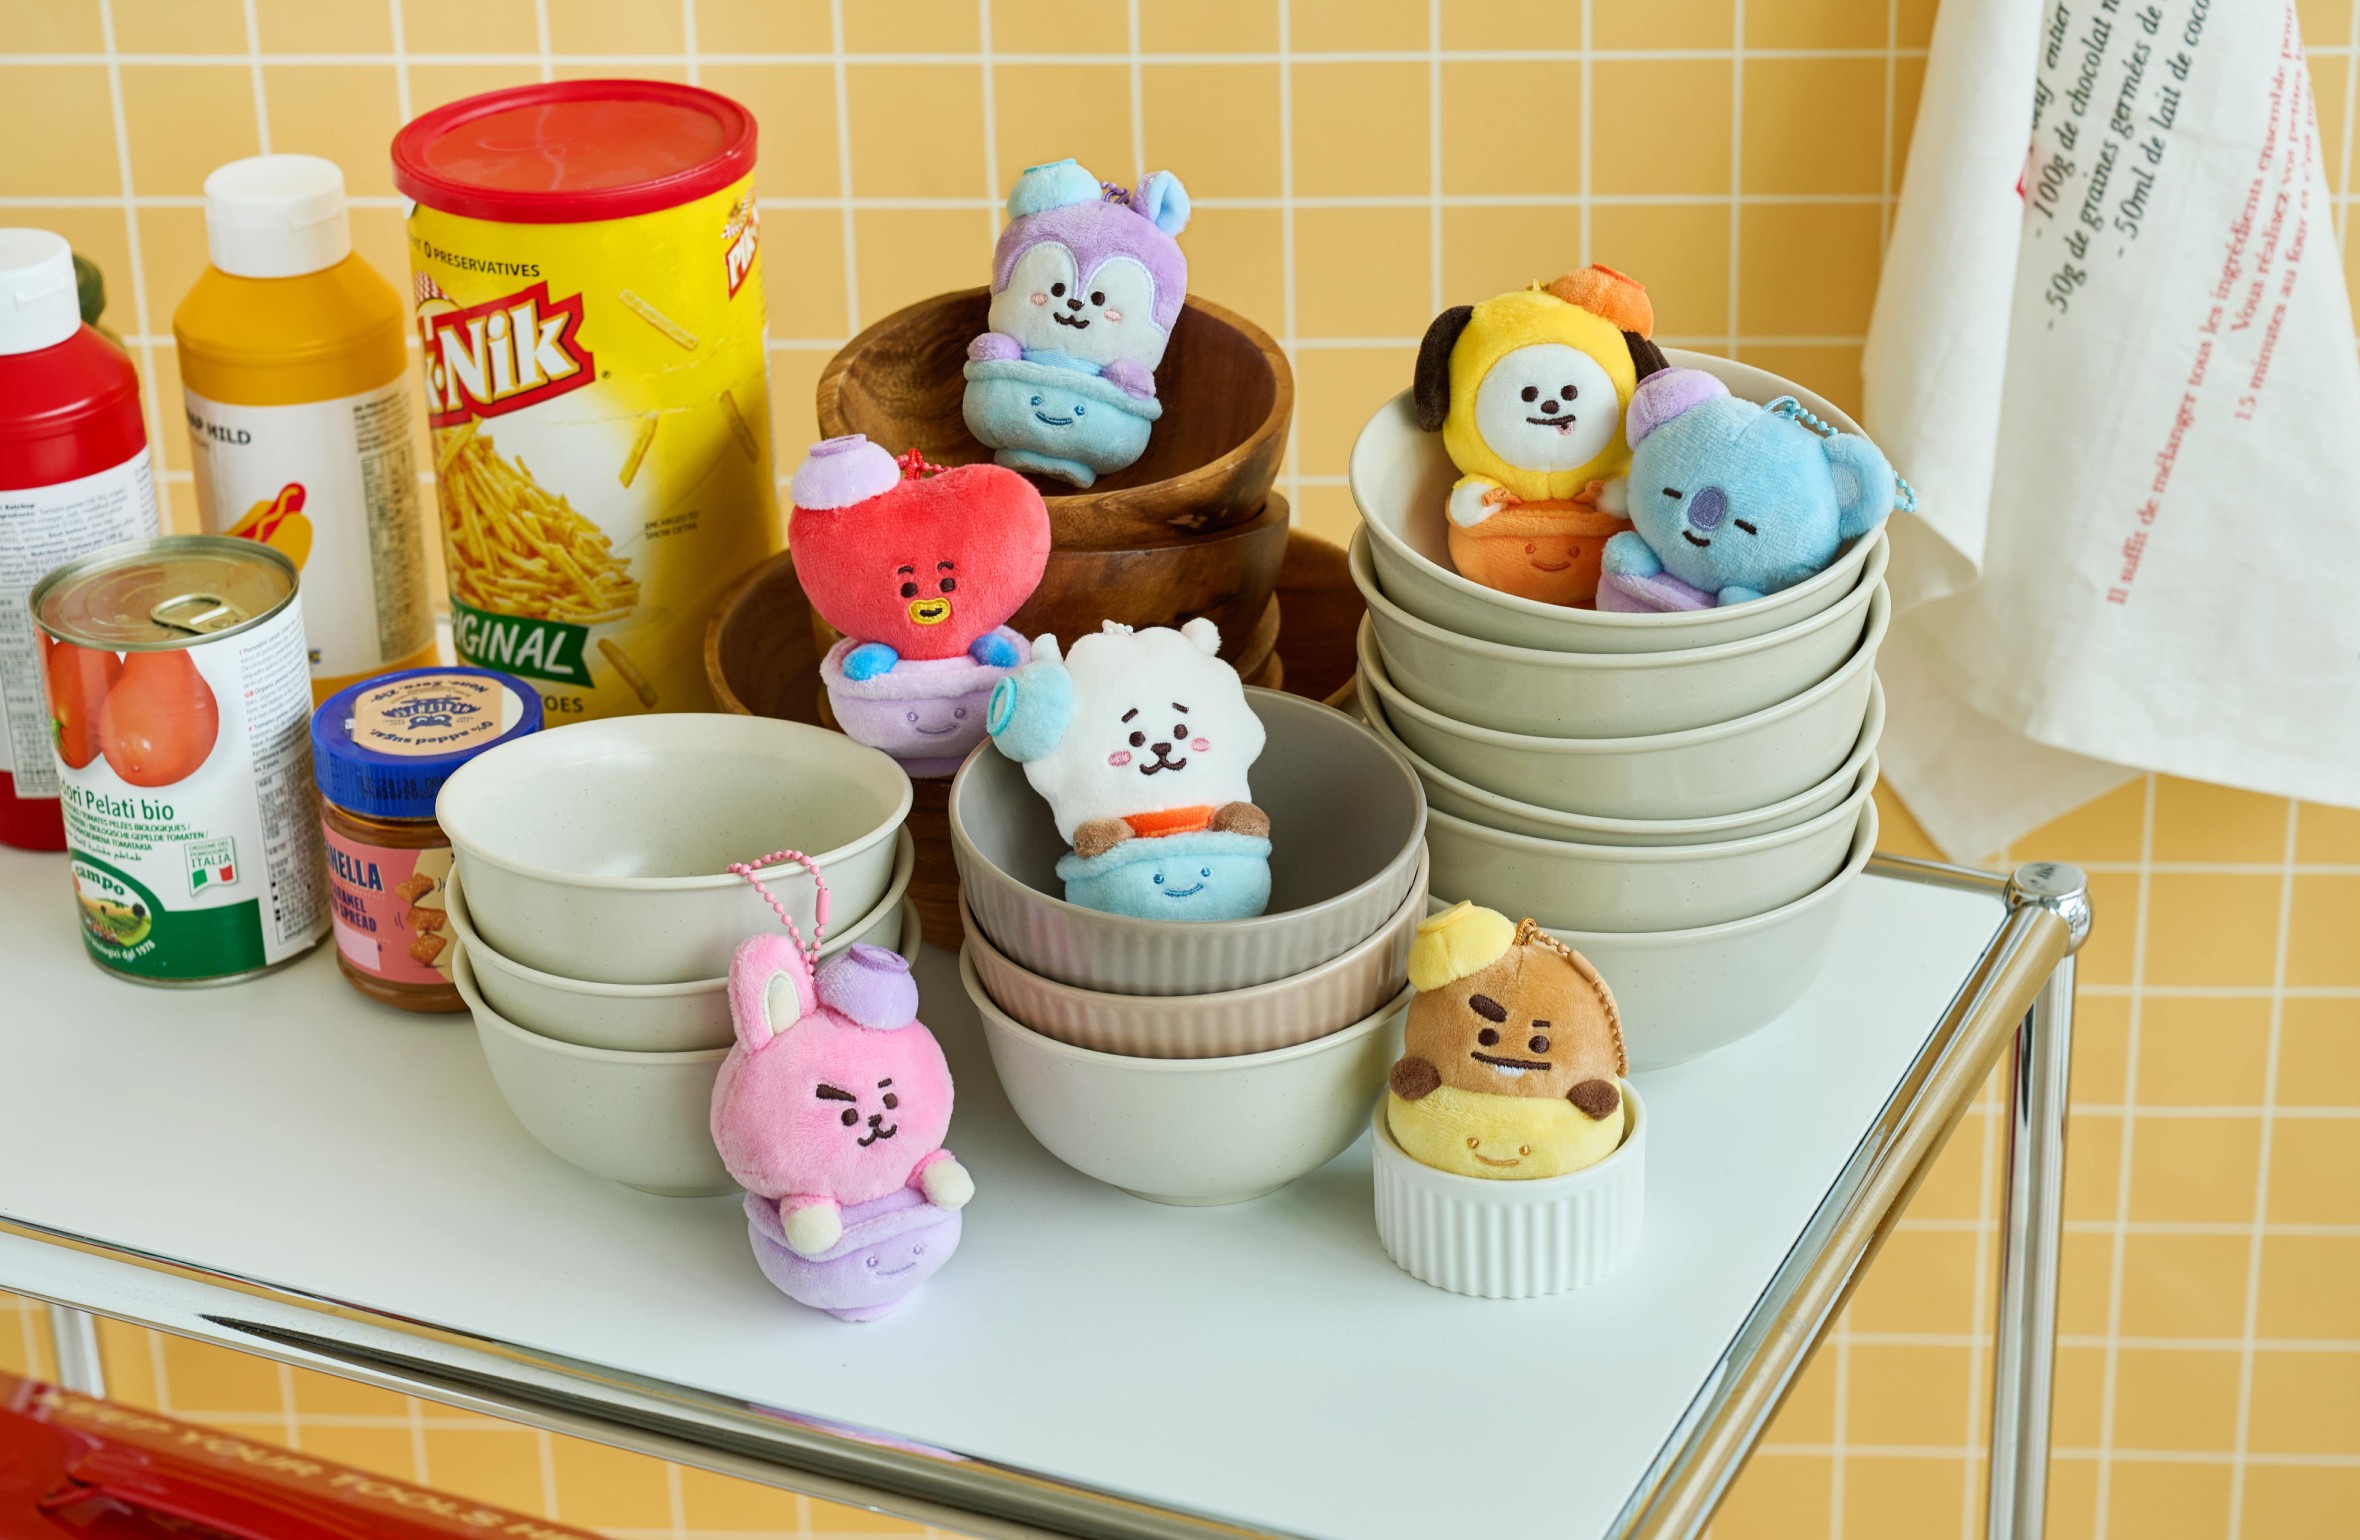 BT21 in a rice bowl miniature